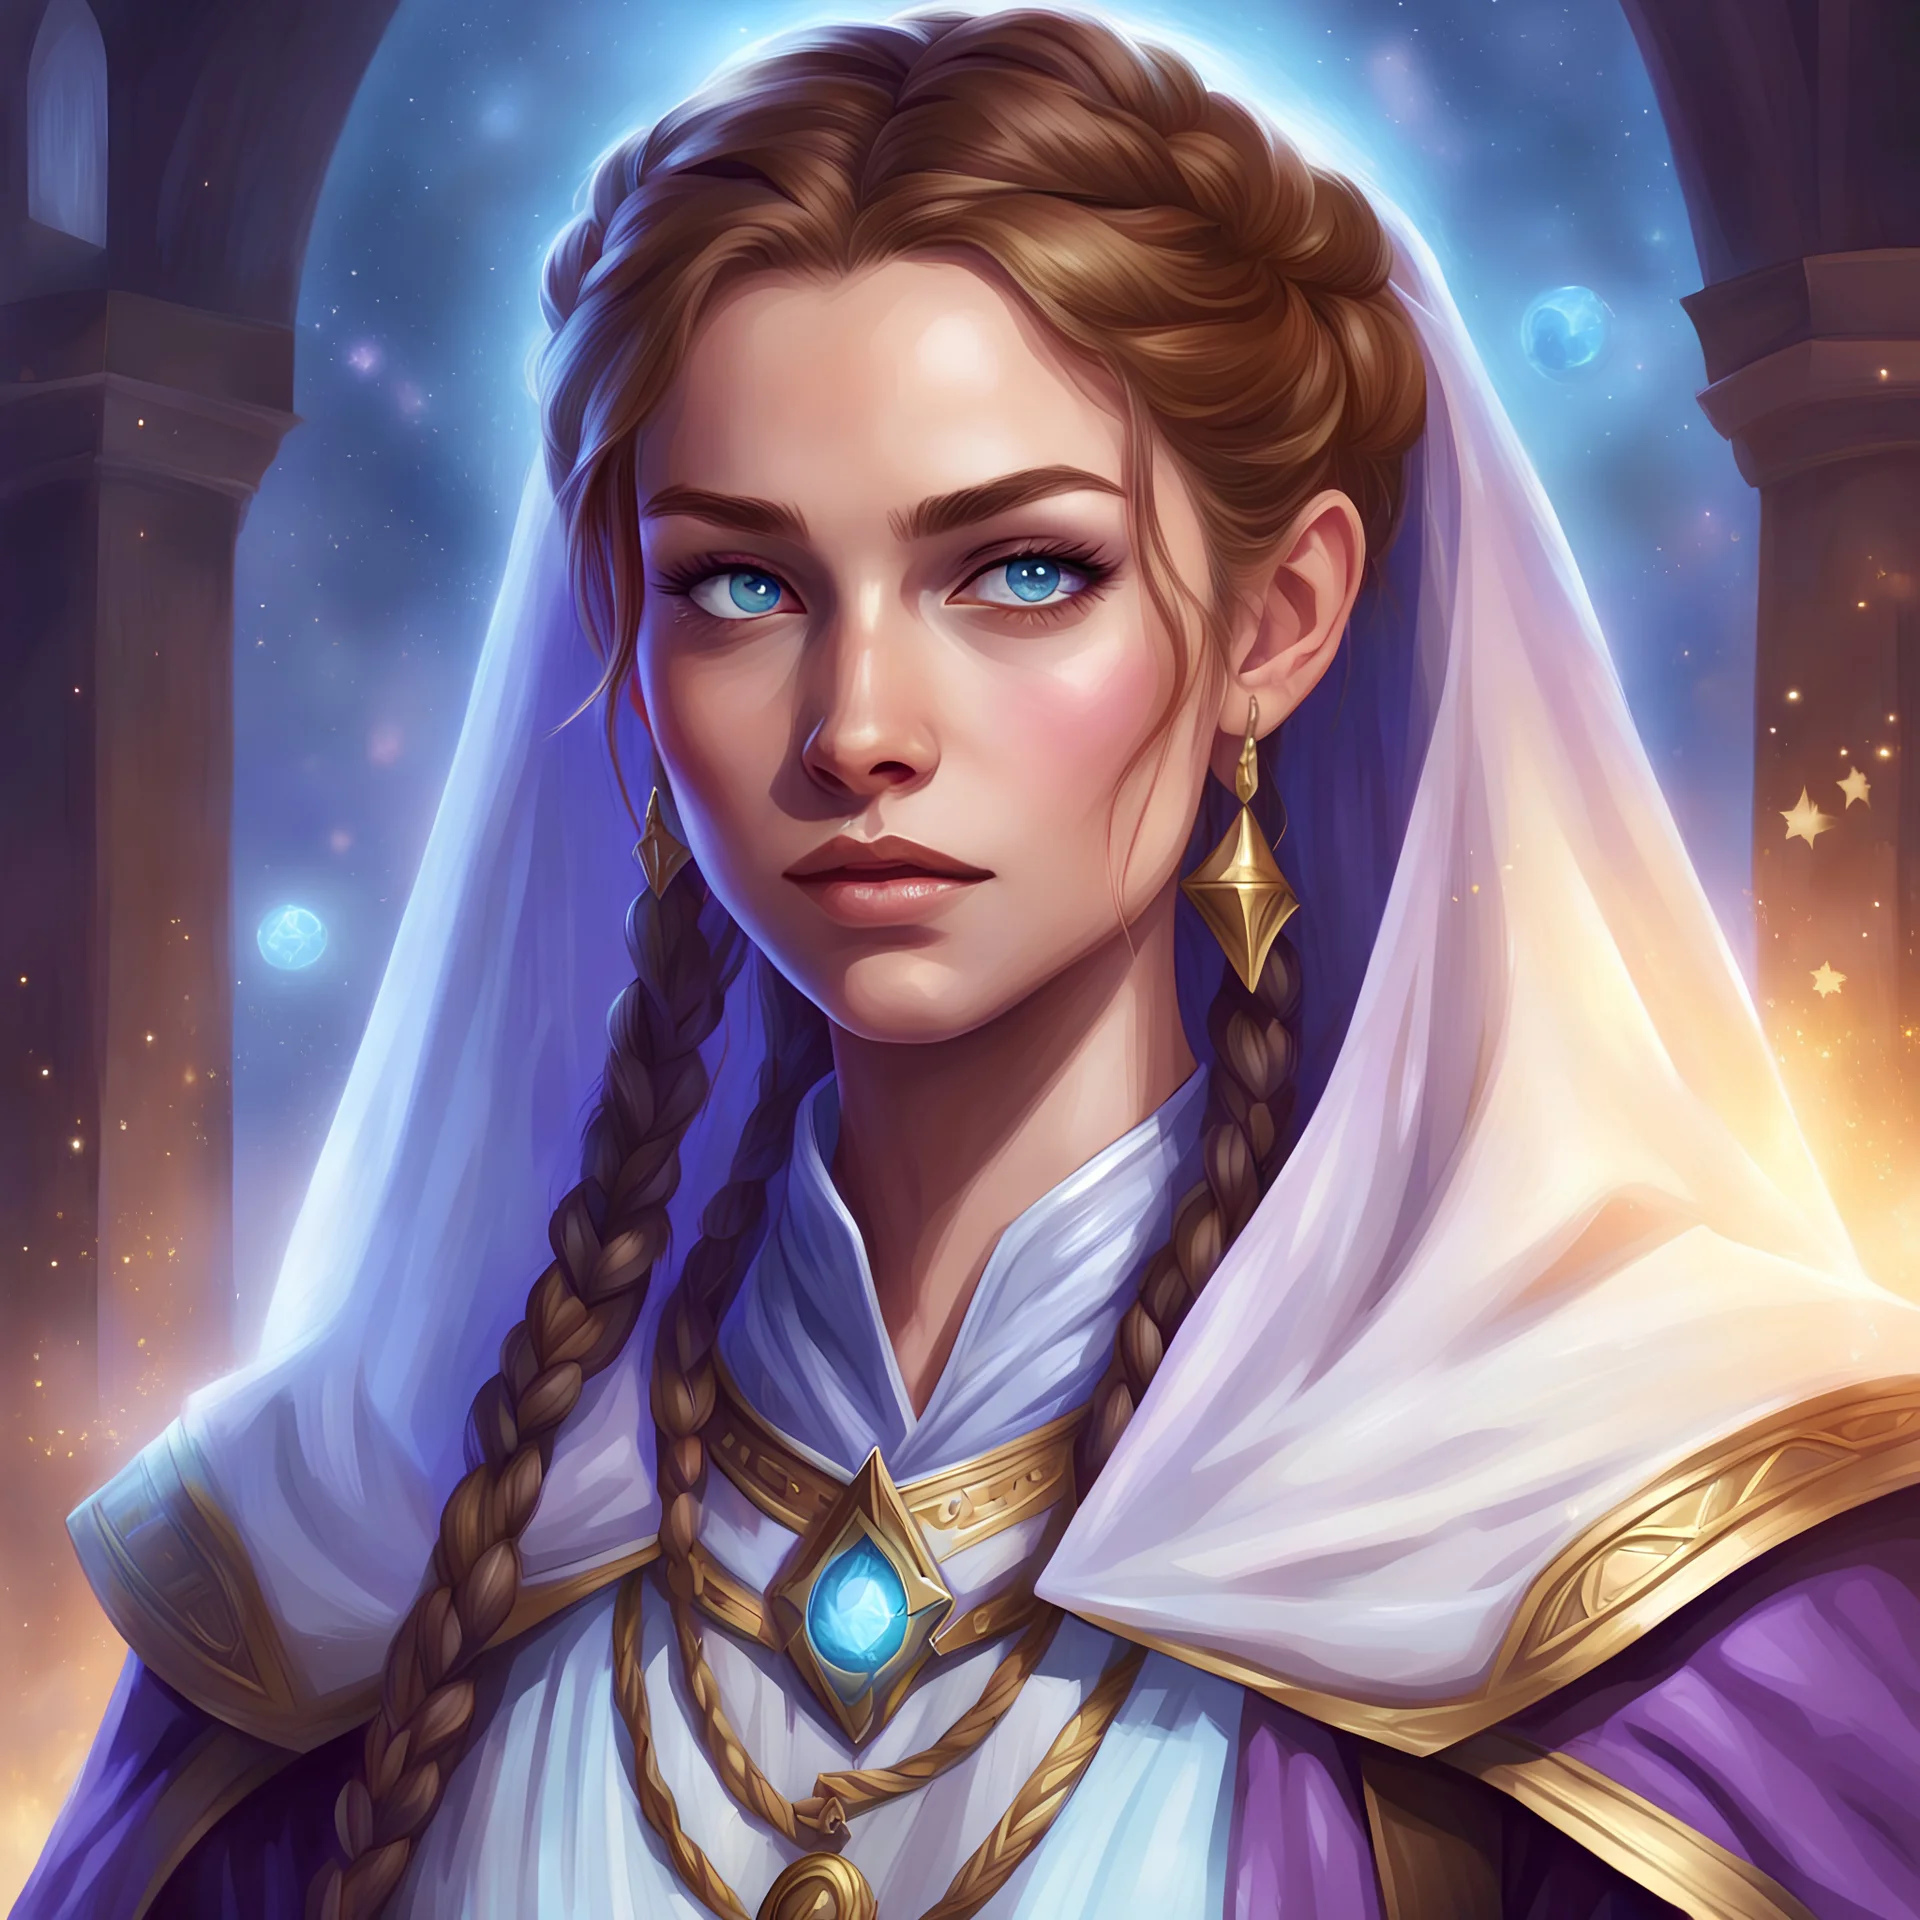 dungeons & dragons; digital art; portrait; female; cleric; violet eyes; light brown hair; young woman; flowing robes; long veil; braided bun; soft clothes; light blue and purple robes; mystra; cleric of mystra; magic; priestess of magic; stars; cleric magic; young; pretty; absolute; teenager